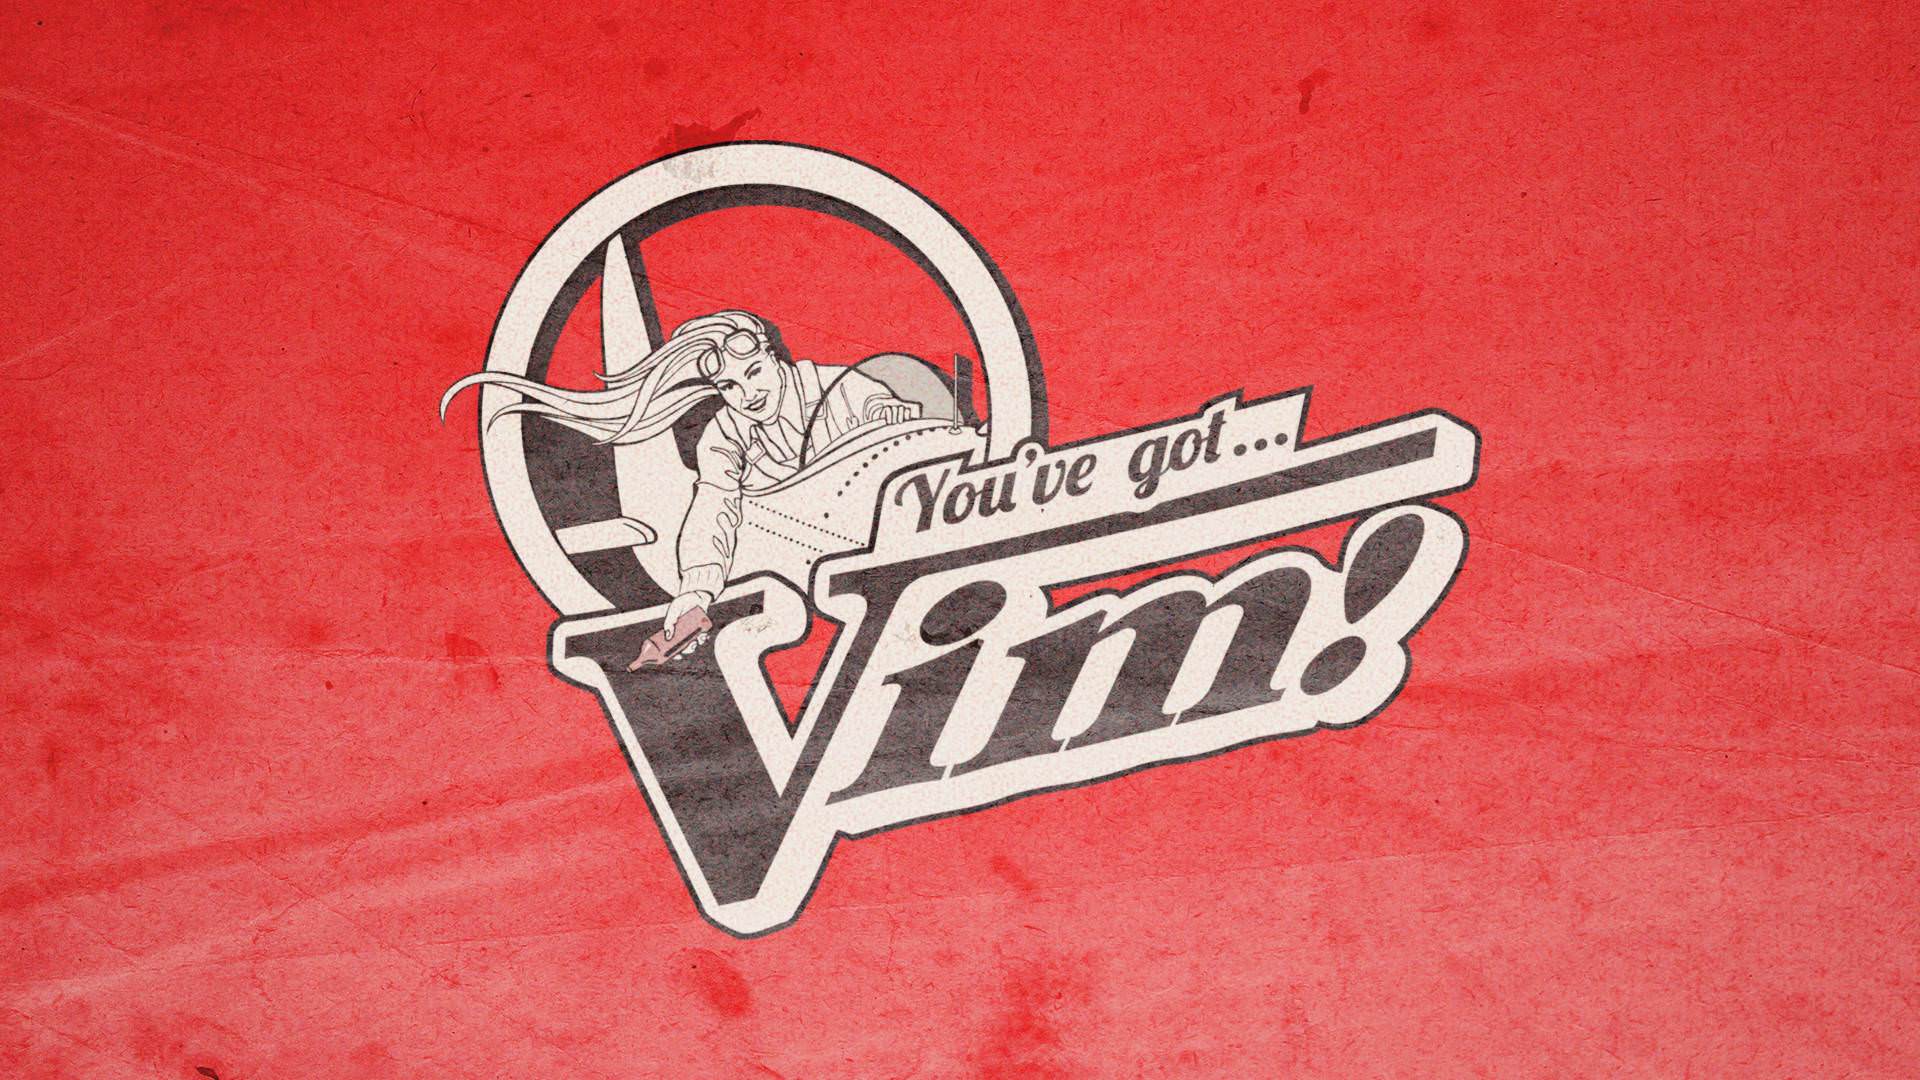 You've got Vim from Fallout 4